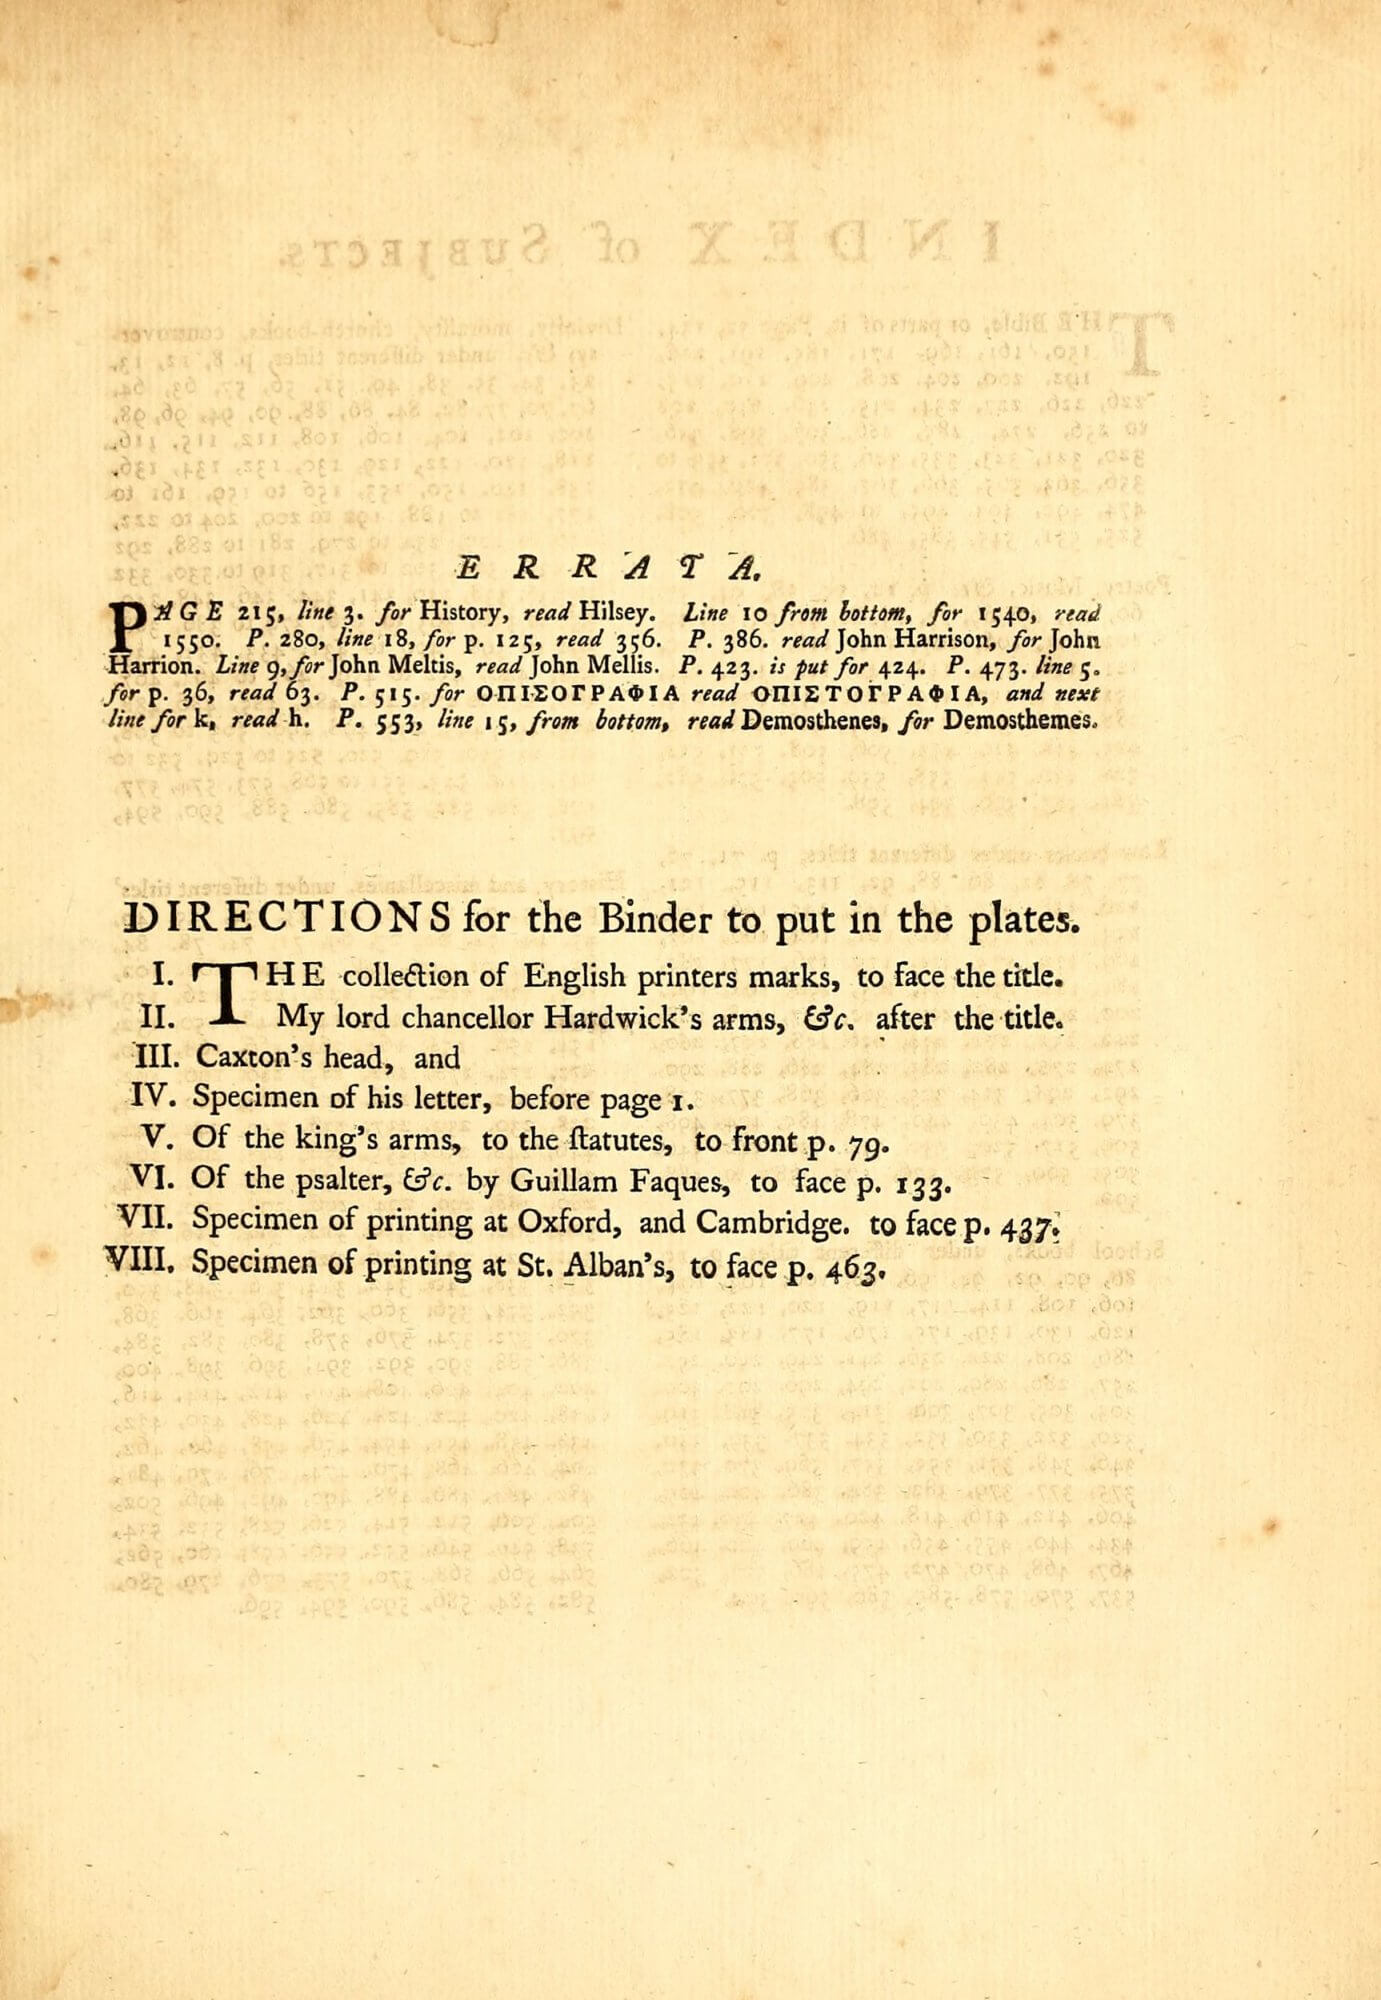 Since intaglio plates were printed separately from letterpress sheets, books often included notes to the binder describing where the illustrations should go. As is typical, these instructions appear on the very last printed page of the book, here facing the subject index; you can see the ink from the index text off-set in the blank areas of this page.